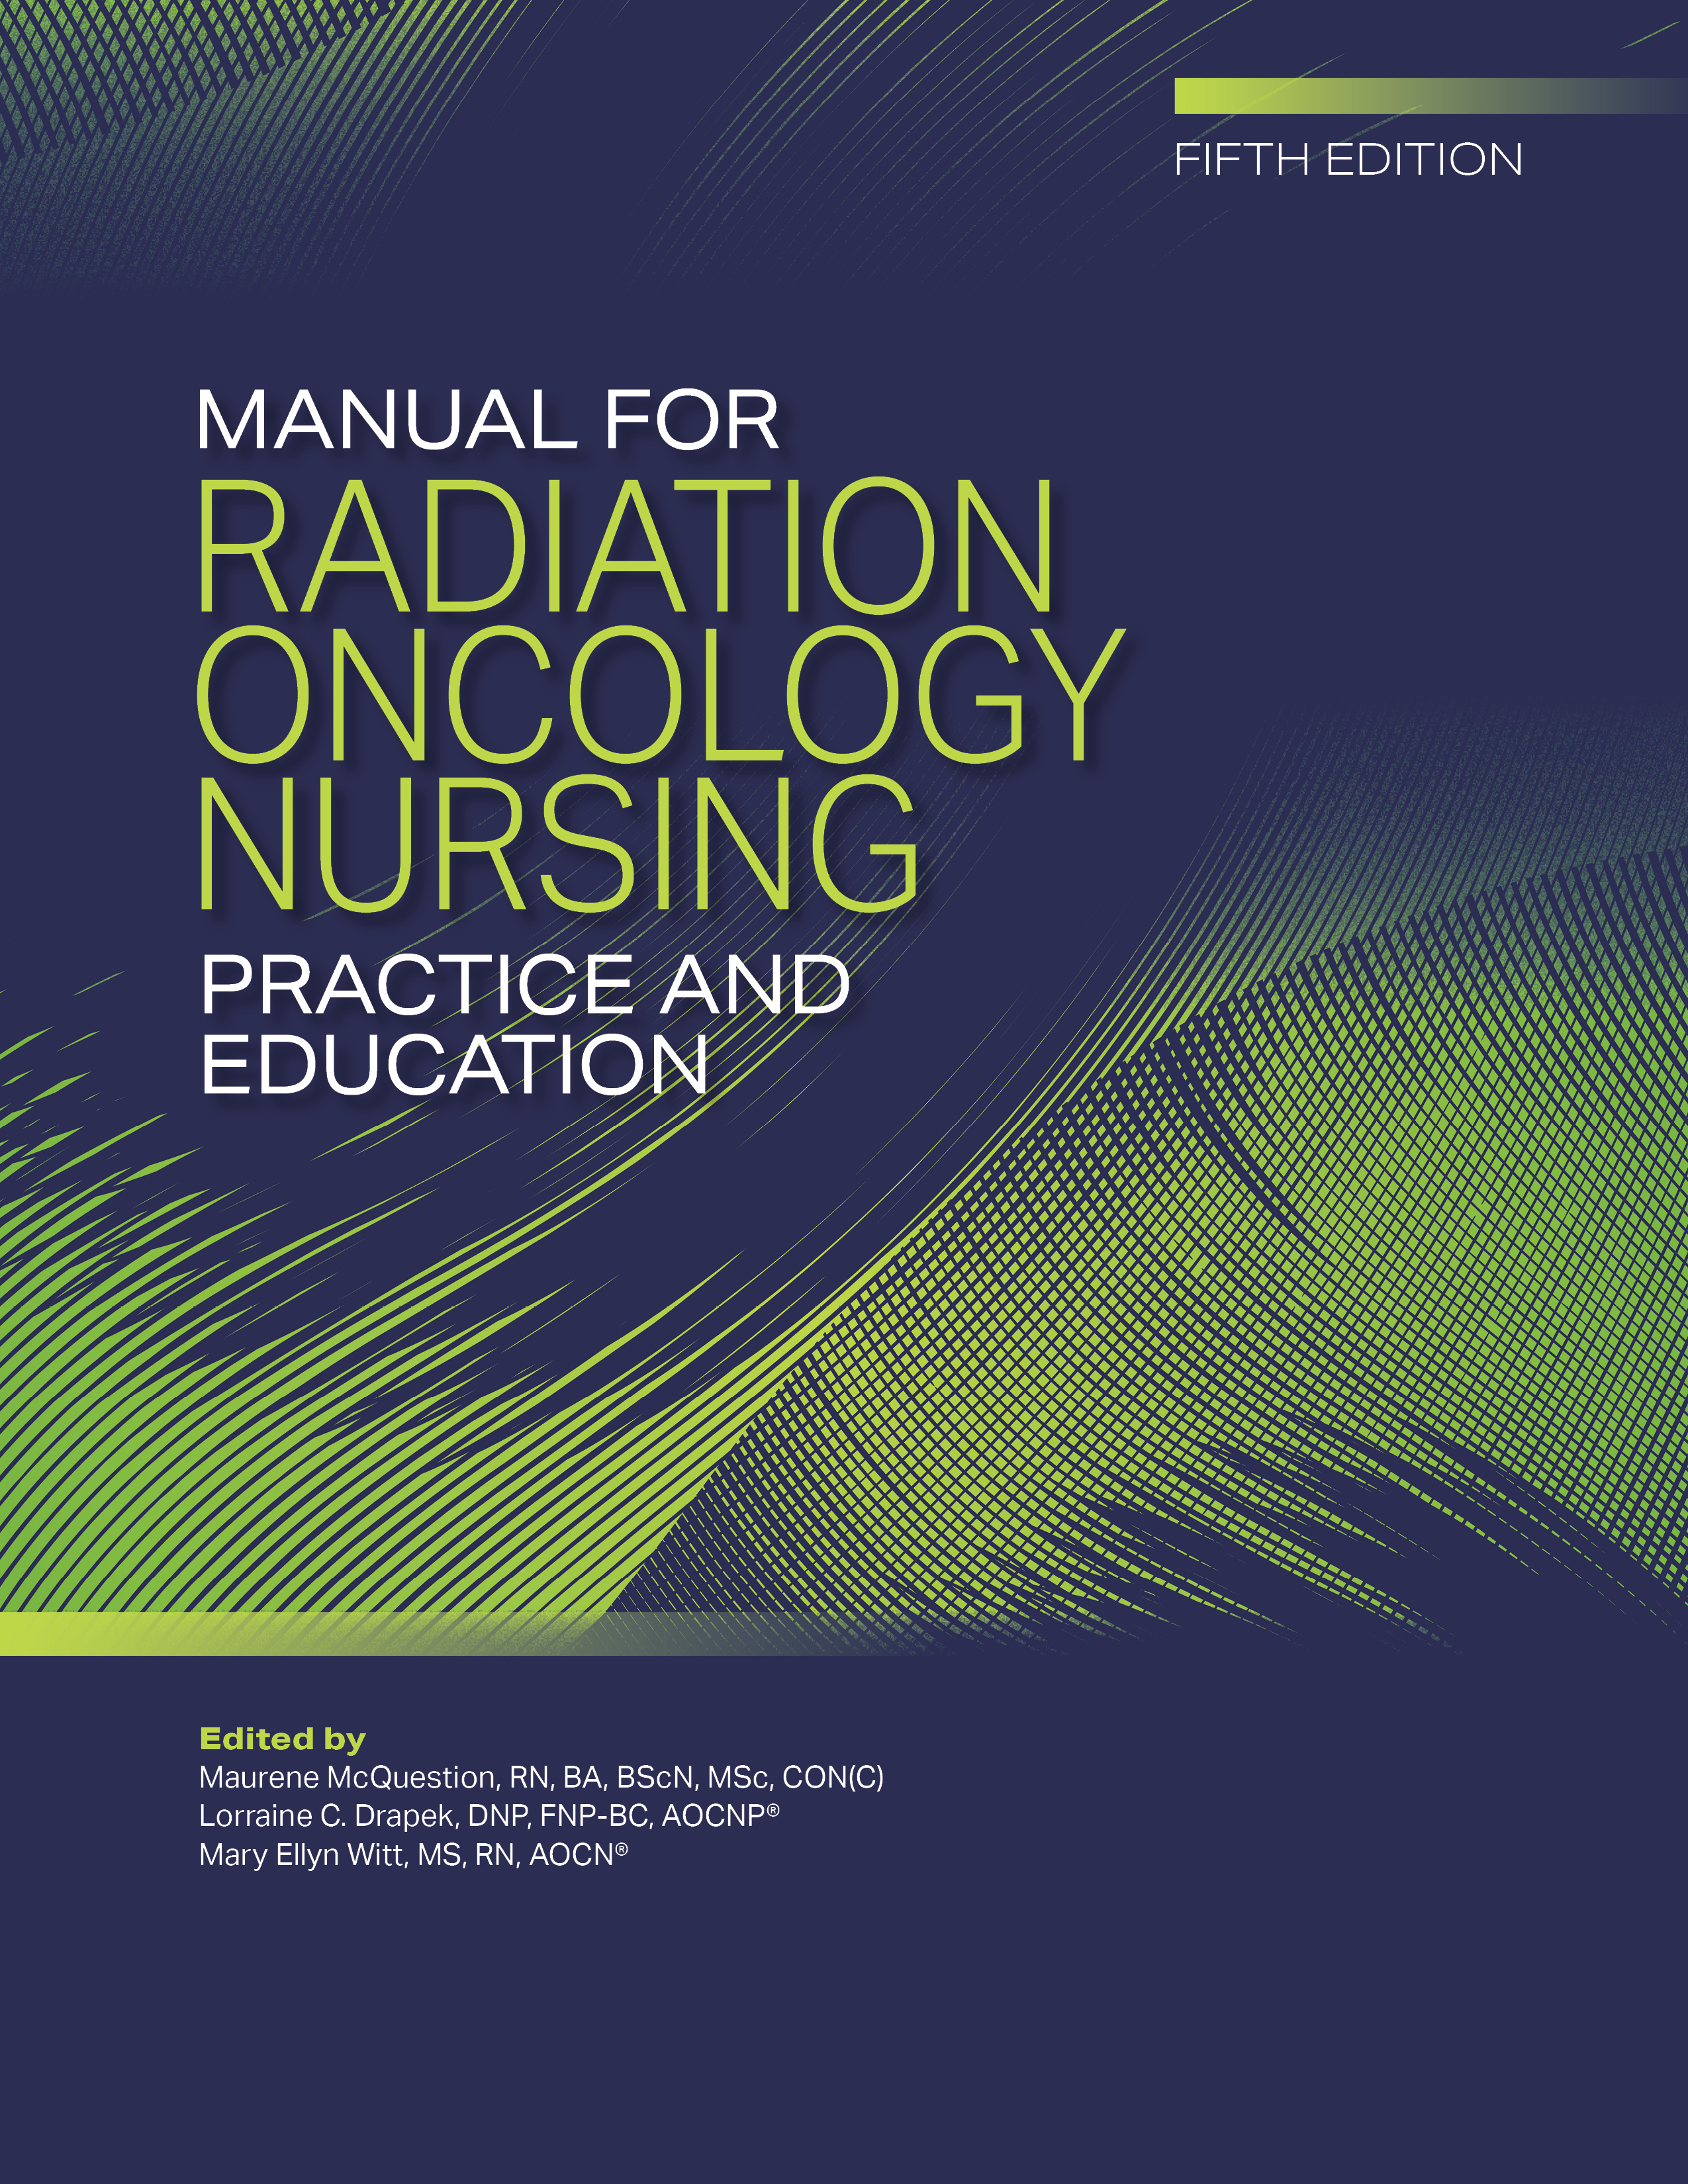 Manual for Radiation Oncology Nursing Practice and Education (Fifth Edition)